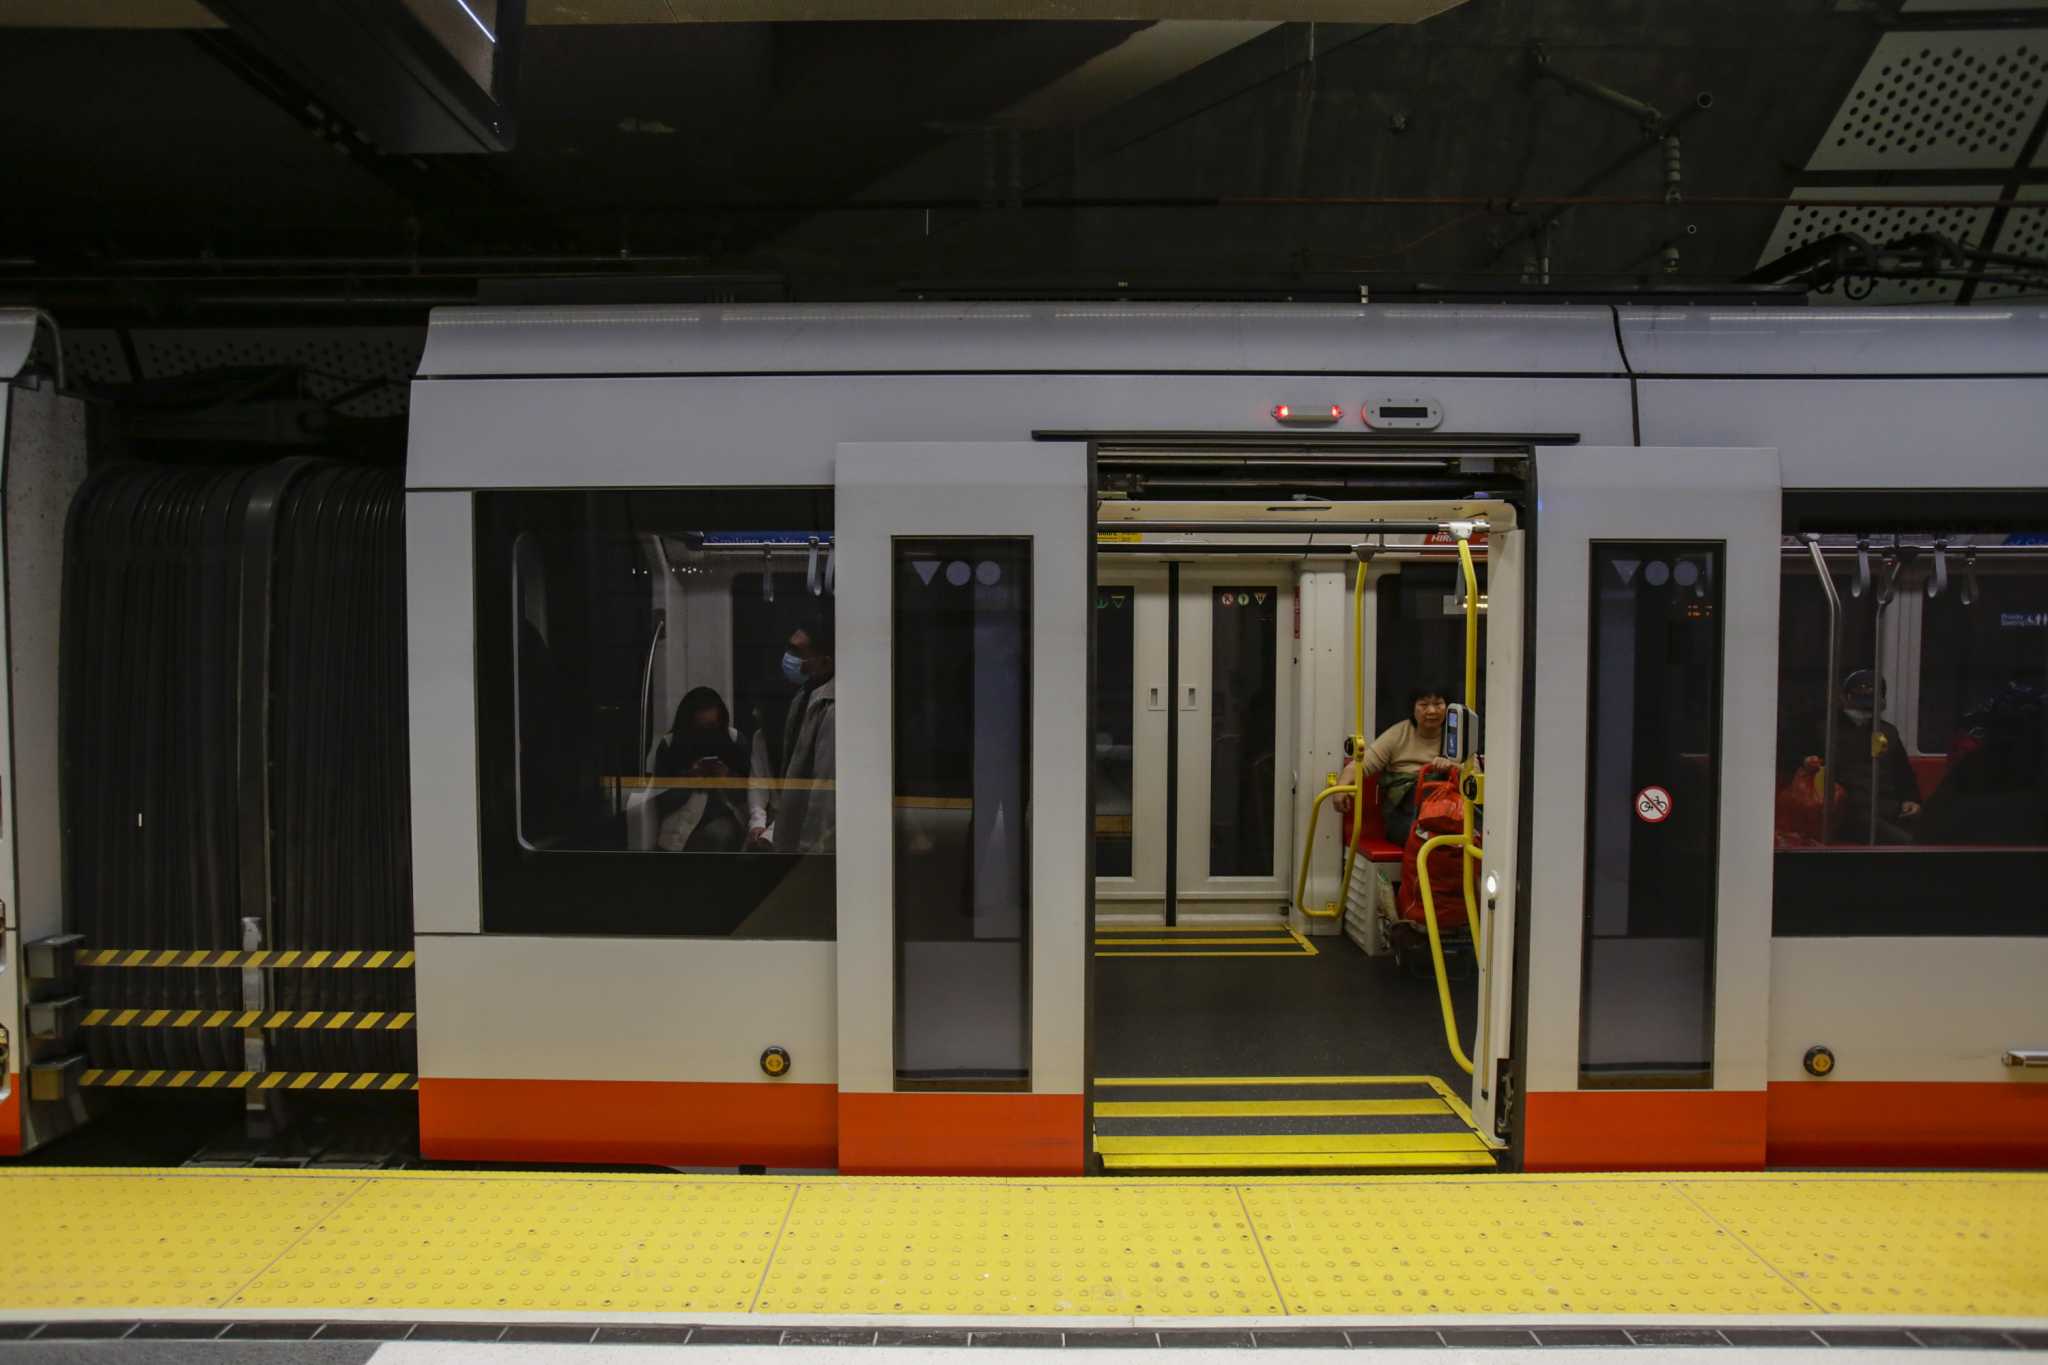 SF’s Central Subway shows a decrease in the number of riders